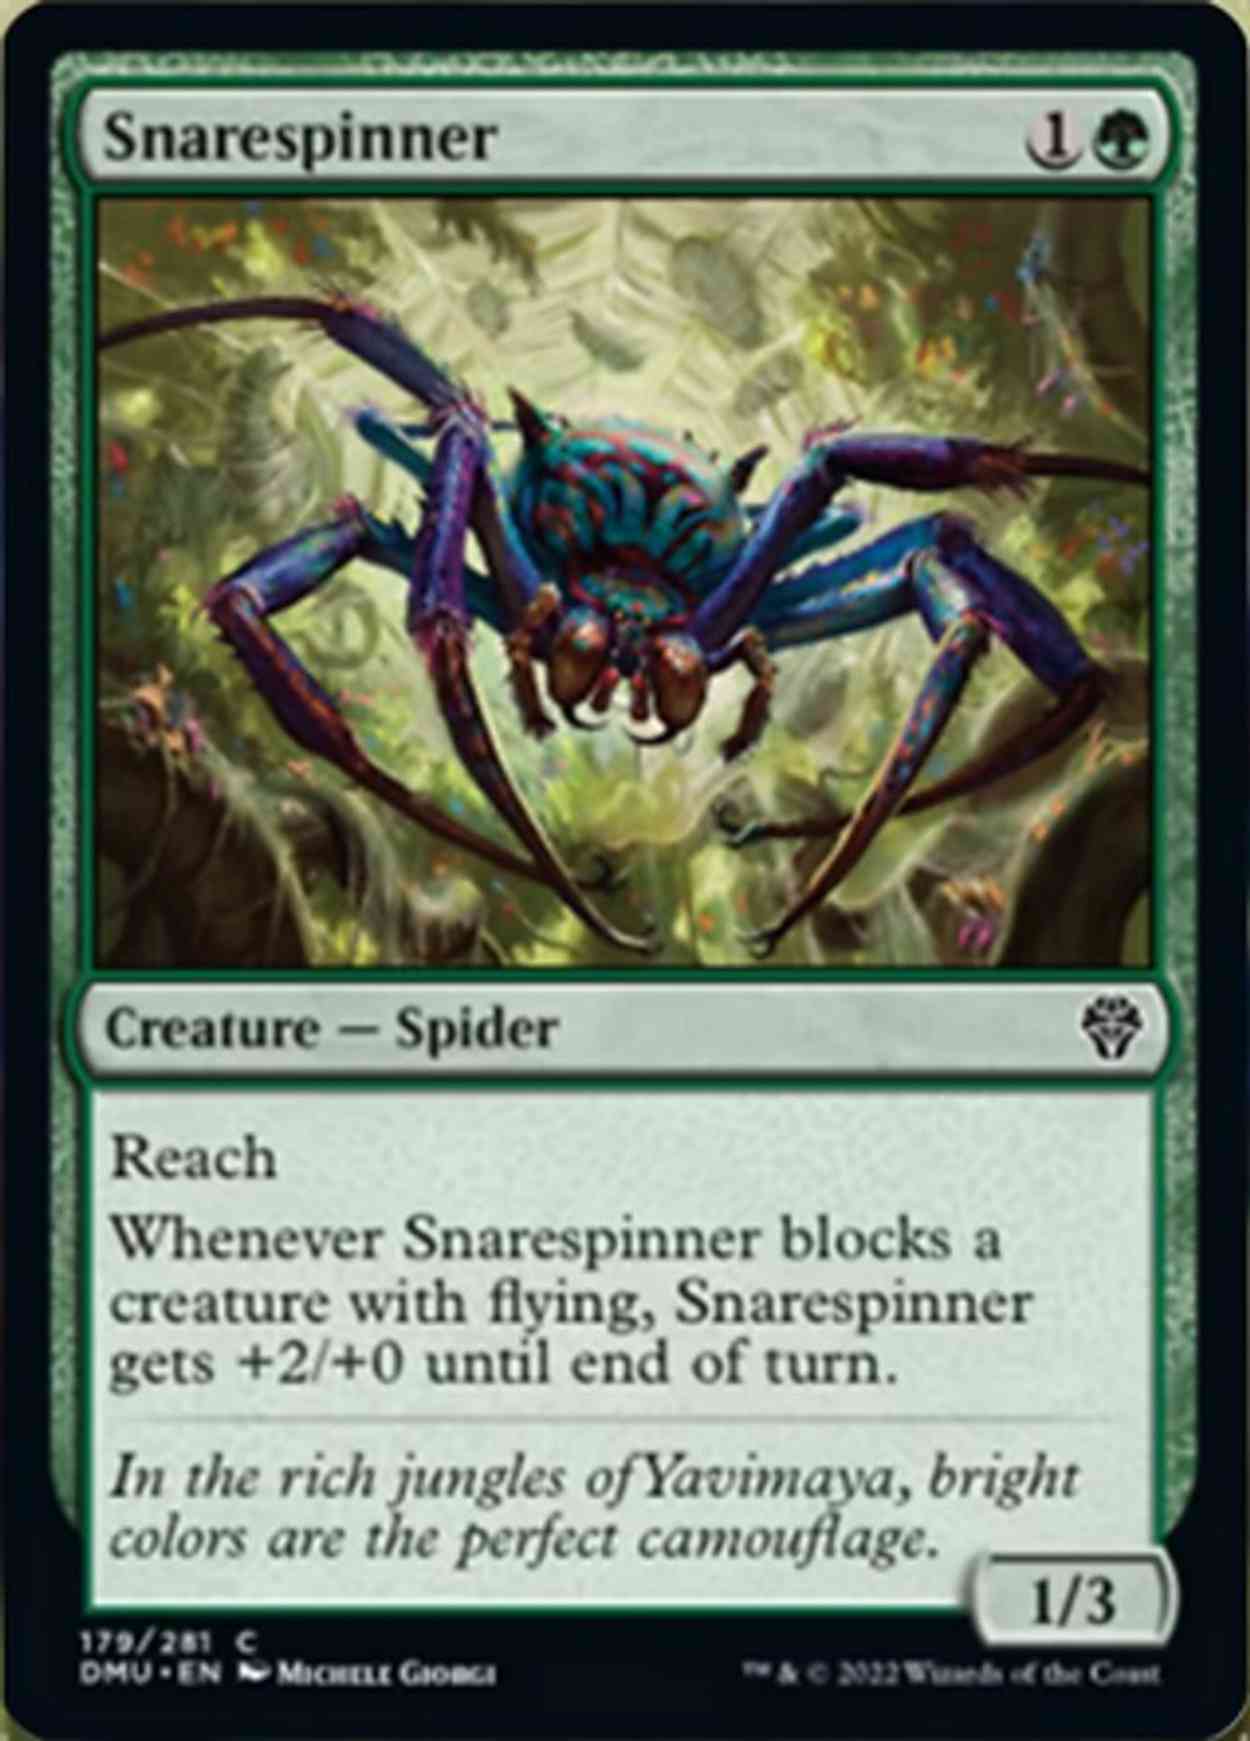 Snarespinner magic card front